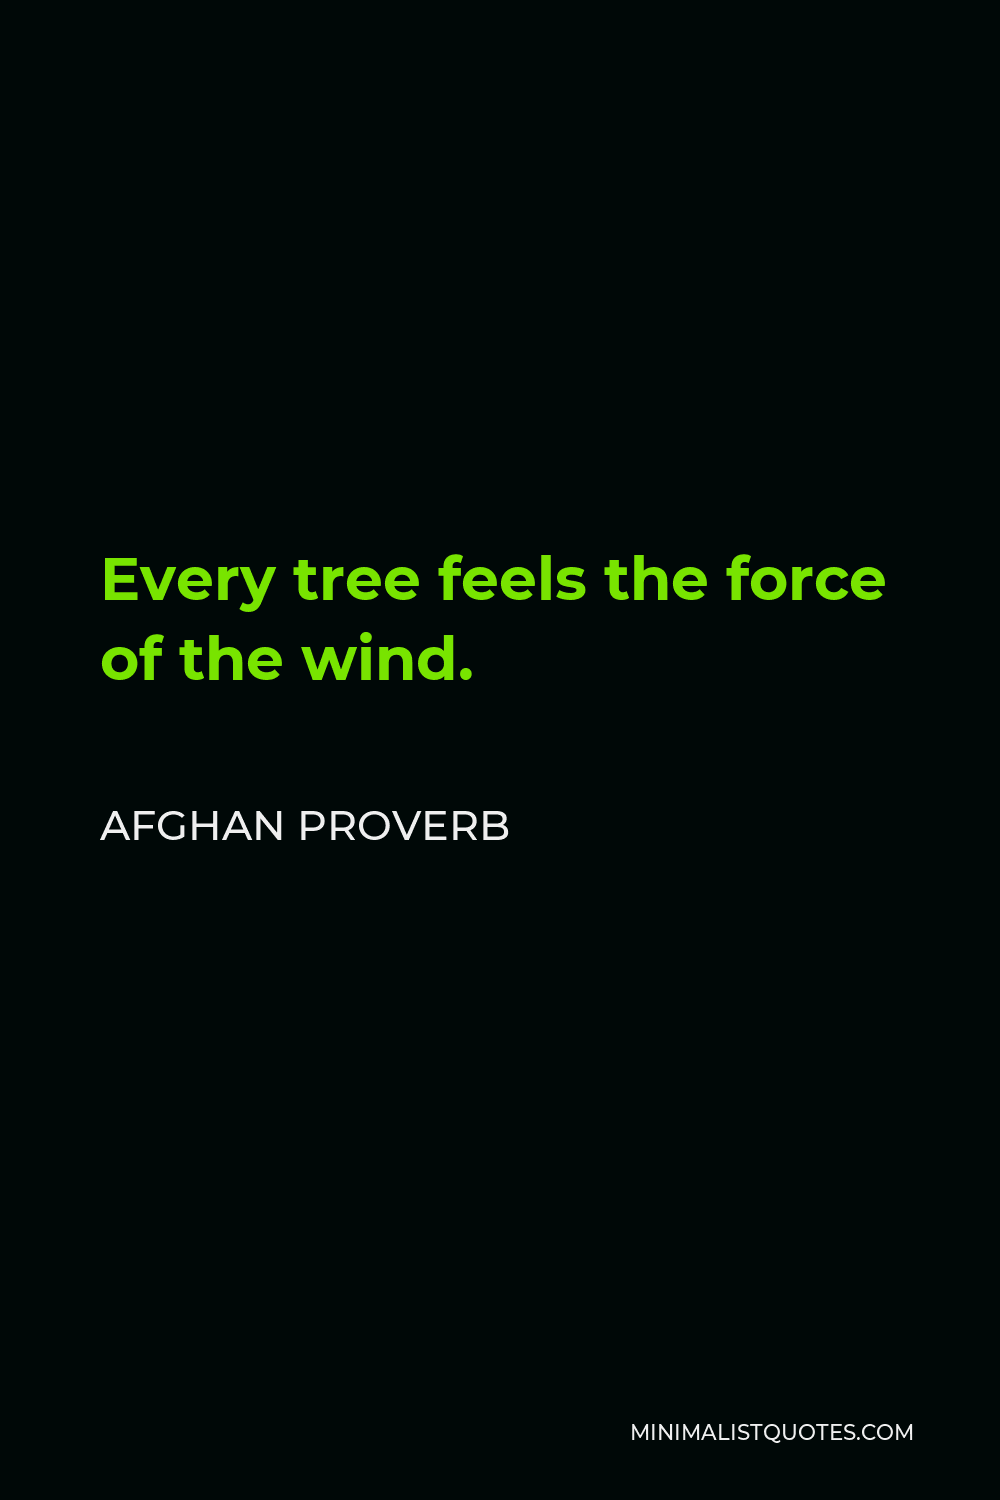 Afghan Proverb Quote - Every tree feels the force of the wind.